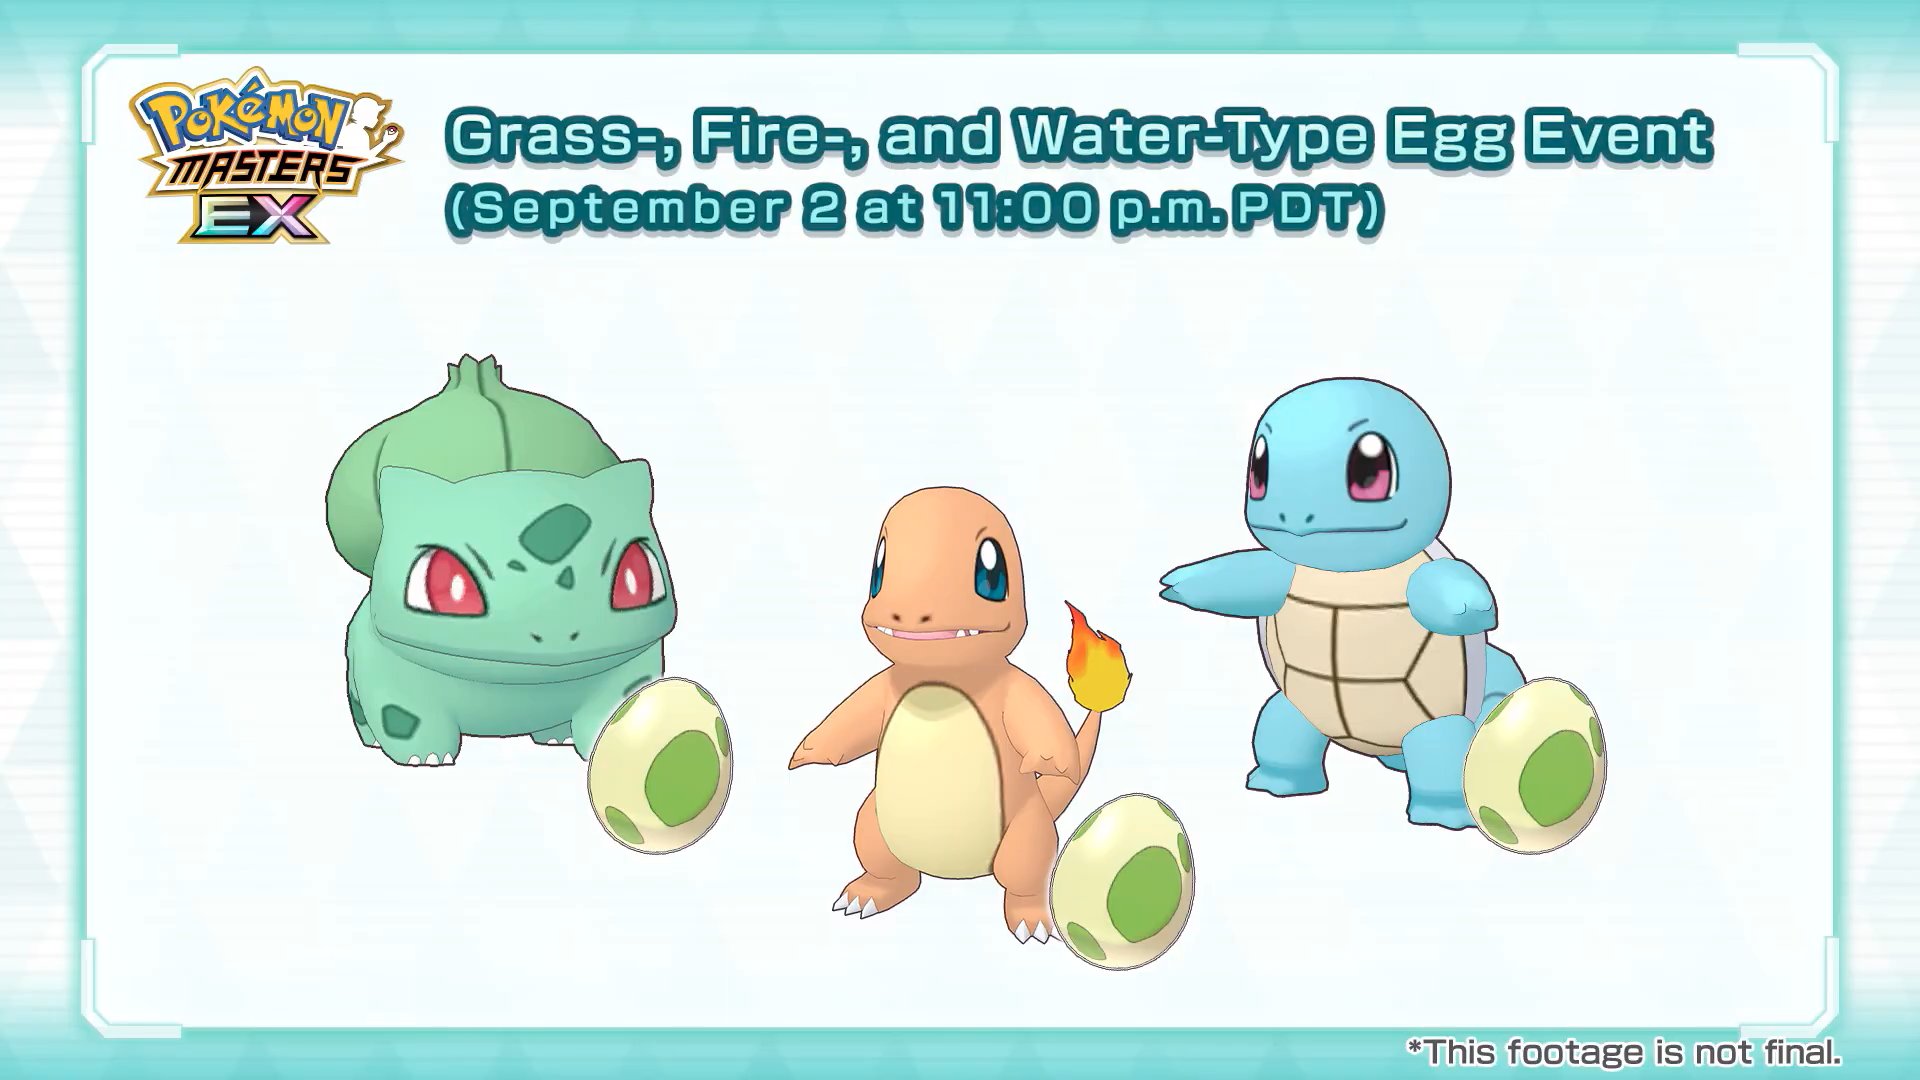 Pokémon Masters EX - The Grass-, Fire-, and Water-Type Egg Event is now  live! You can get Eggs that hatch into Grass-, Fire-, or Water-type Pokémon!  Shiny Bulbasaur, Shiny Charmander, and Shiny